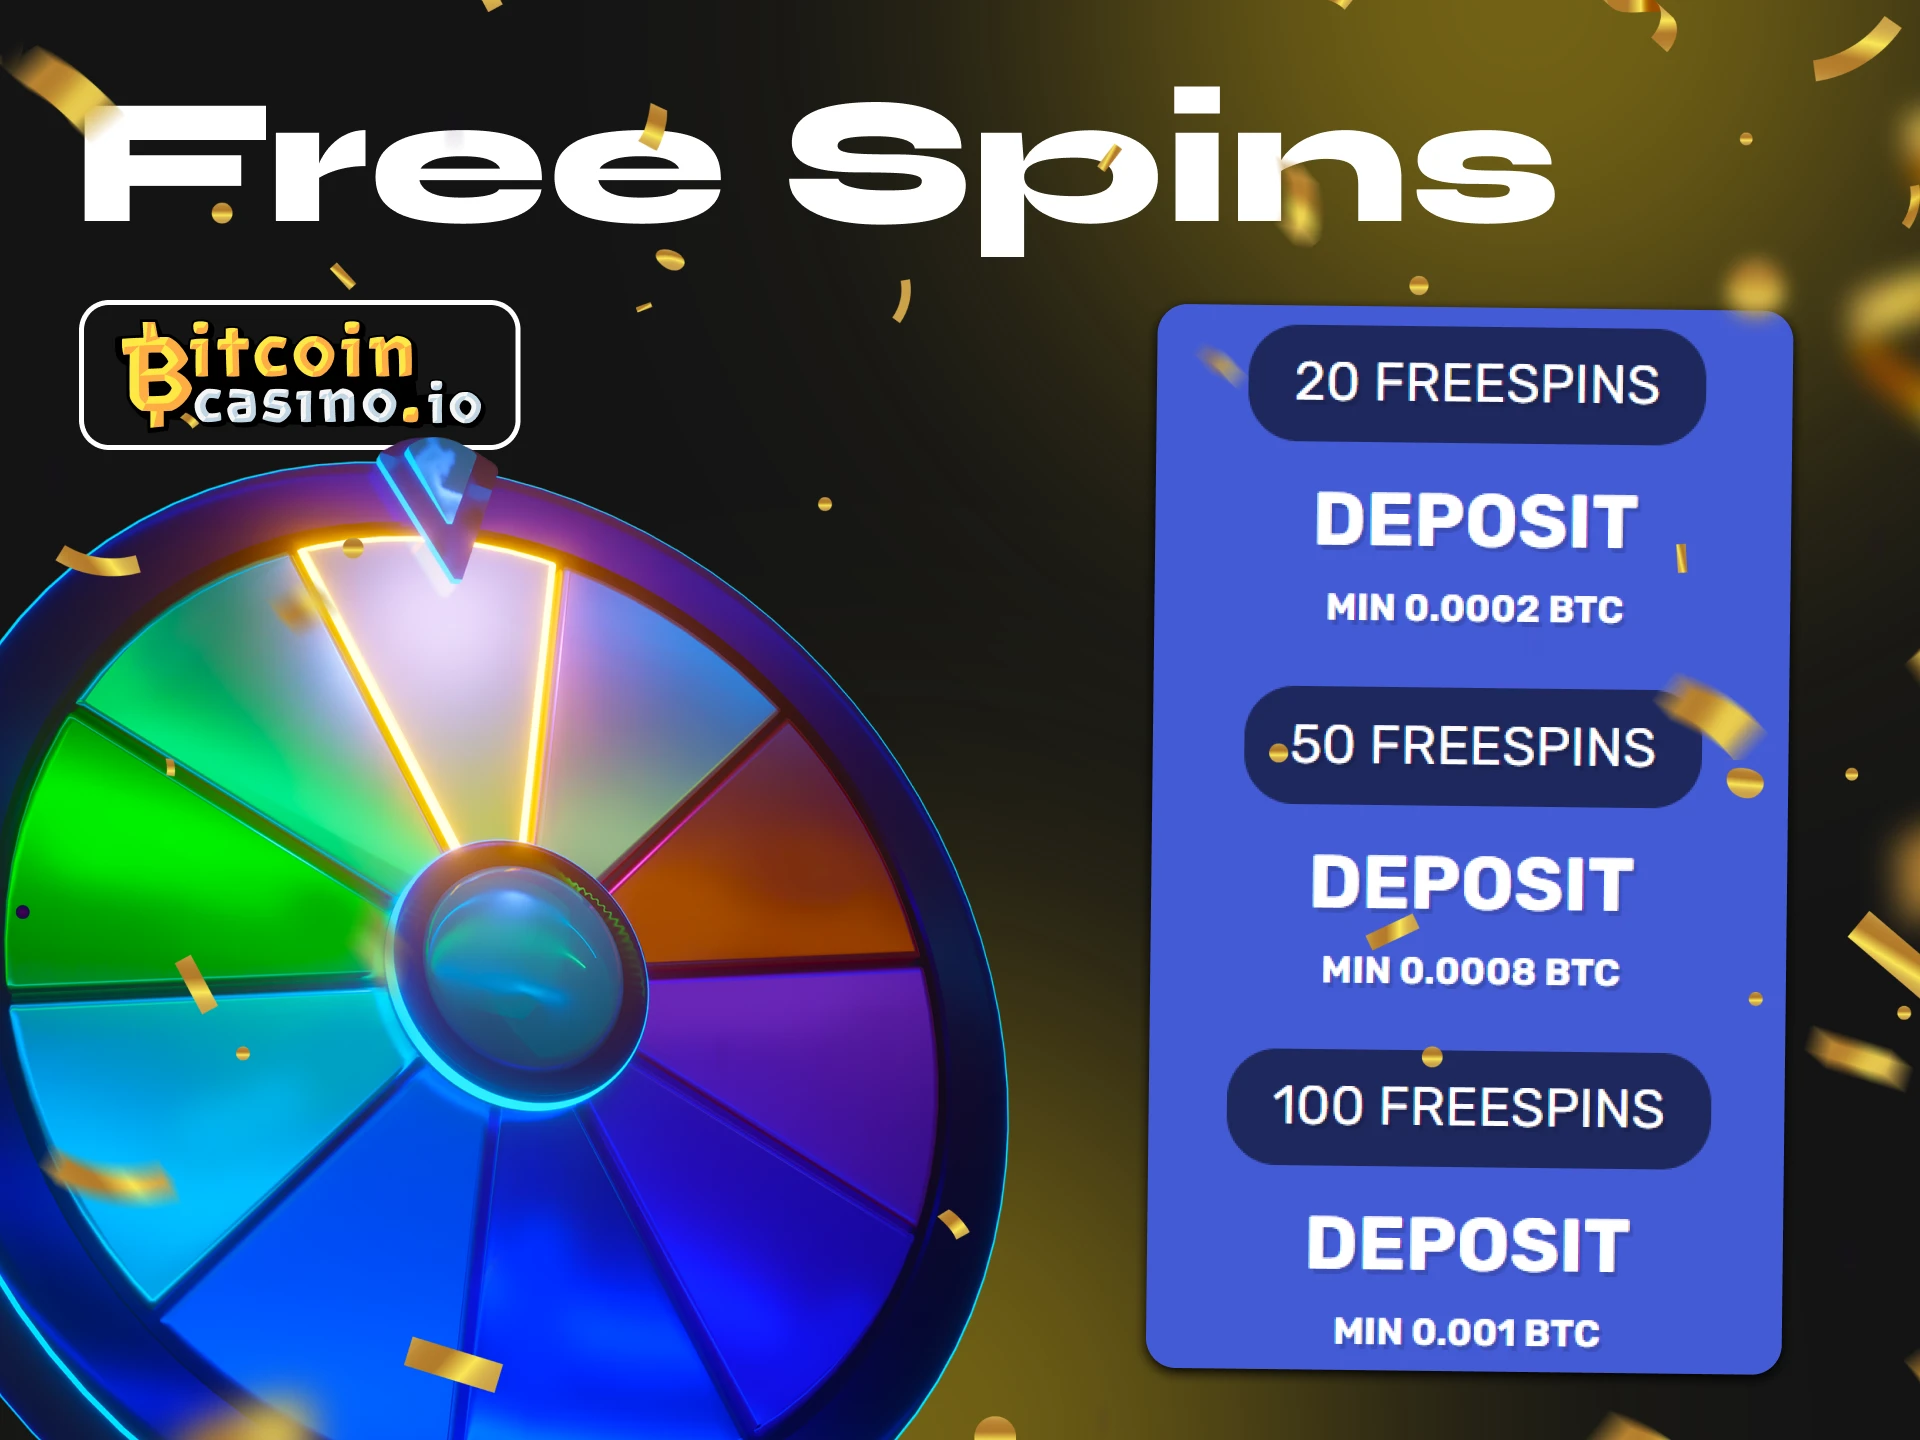 Spin the Bitcoincasino wheel and win prizes thanks to the free spins bonus.